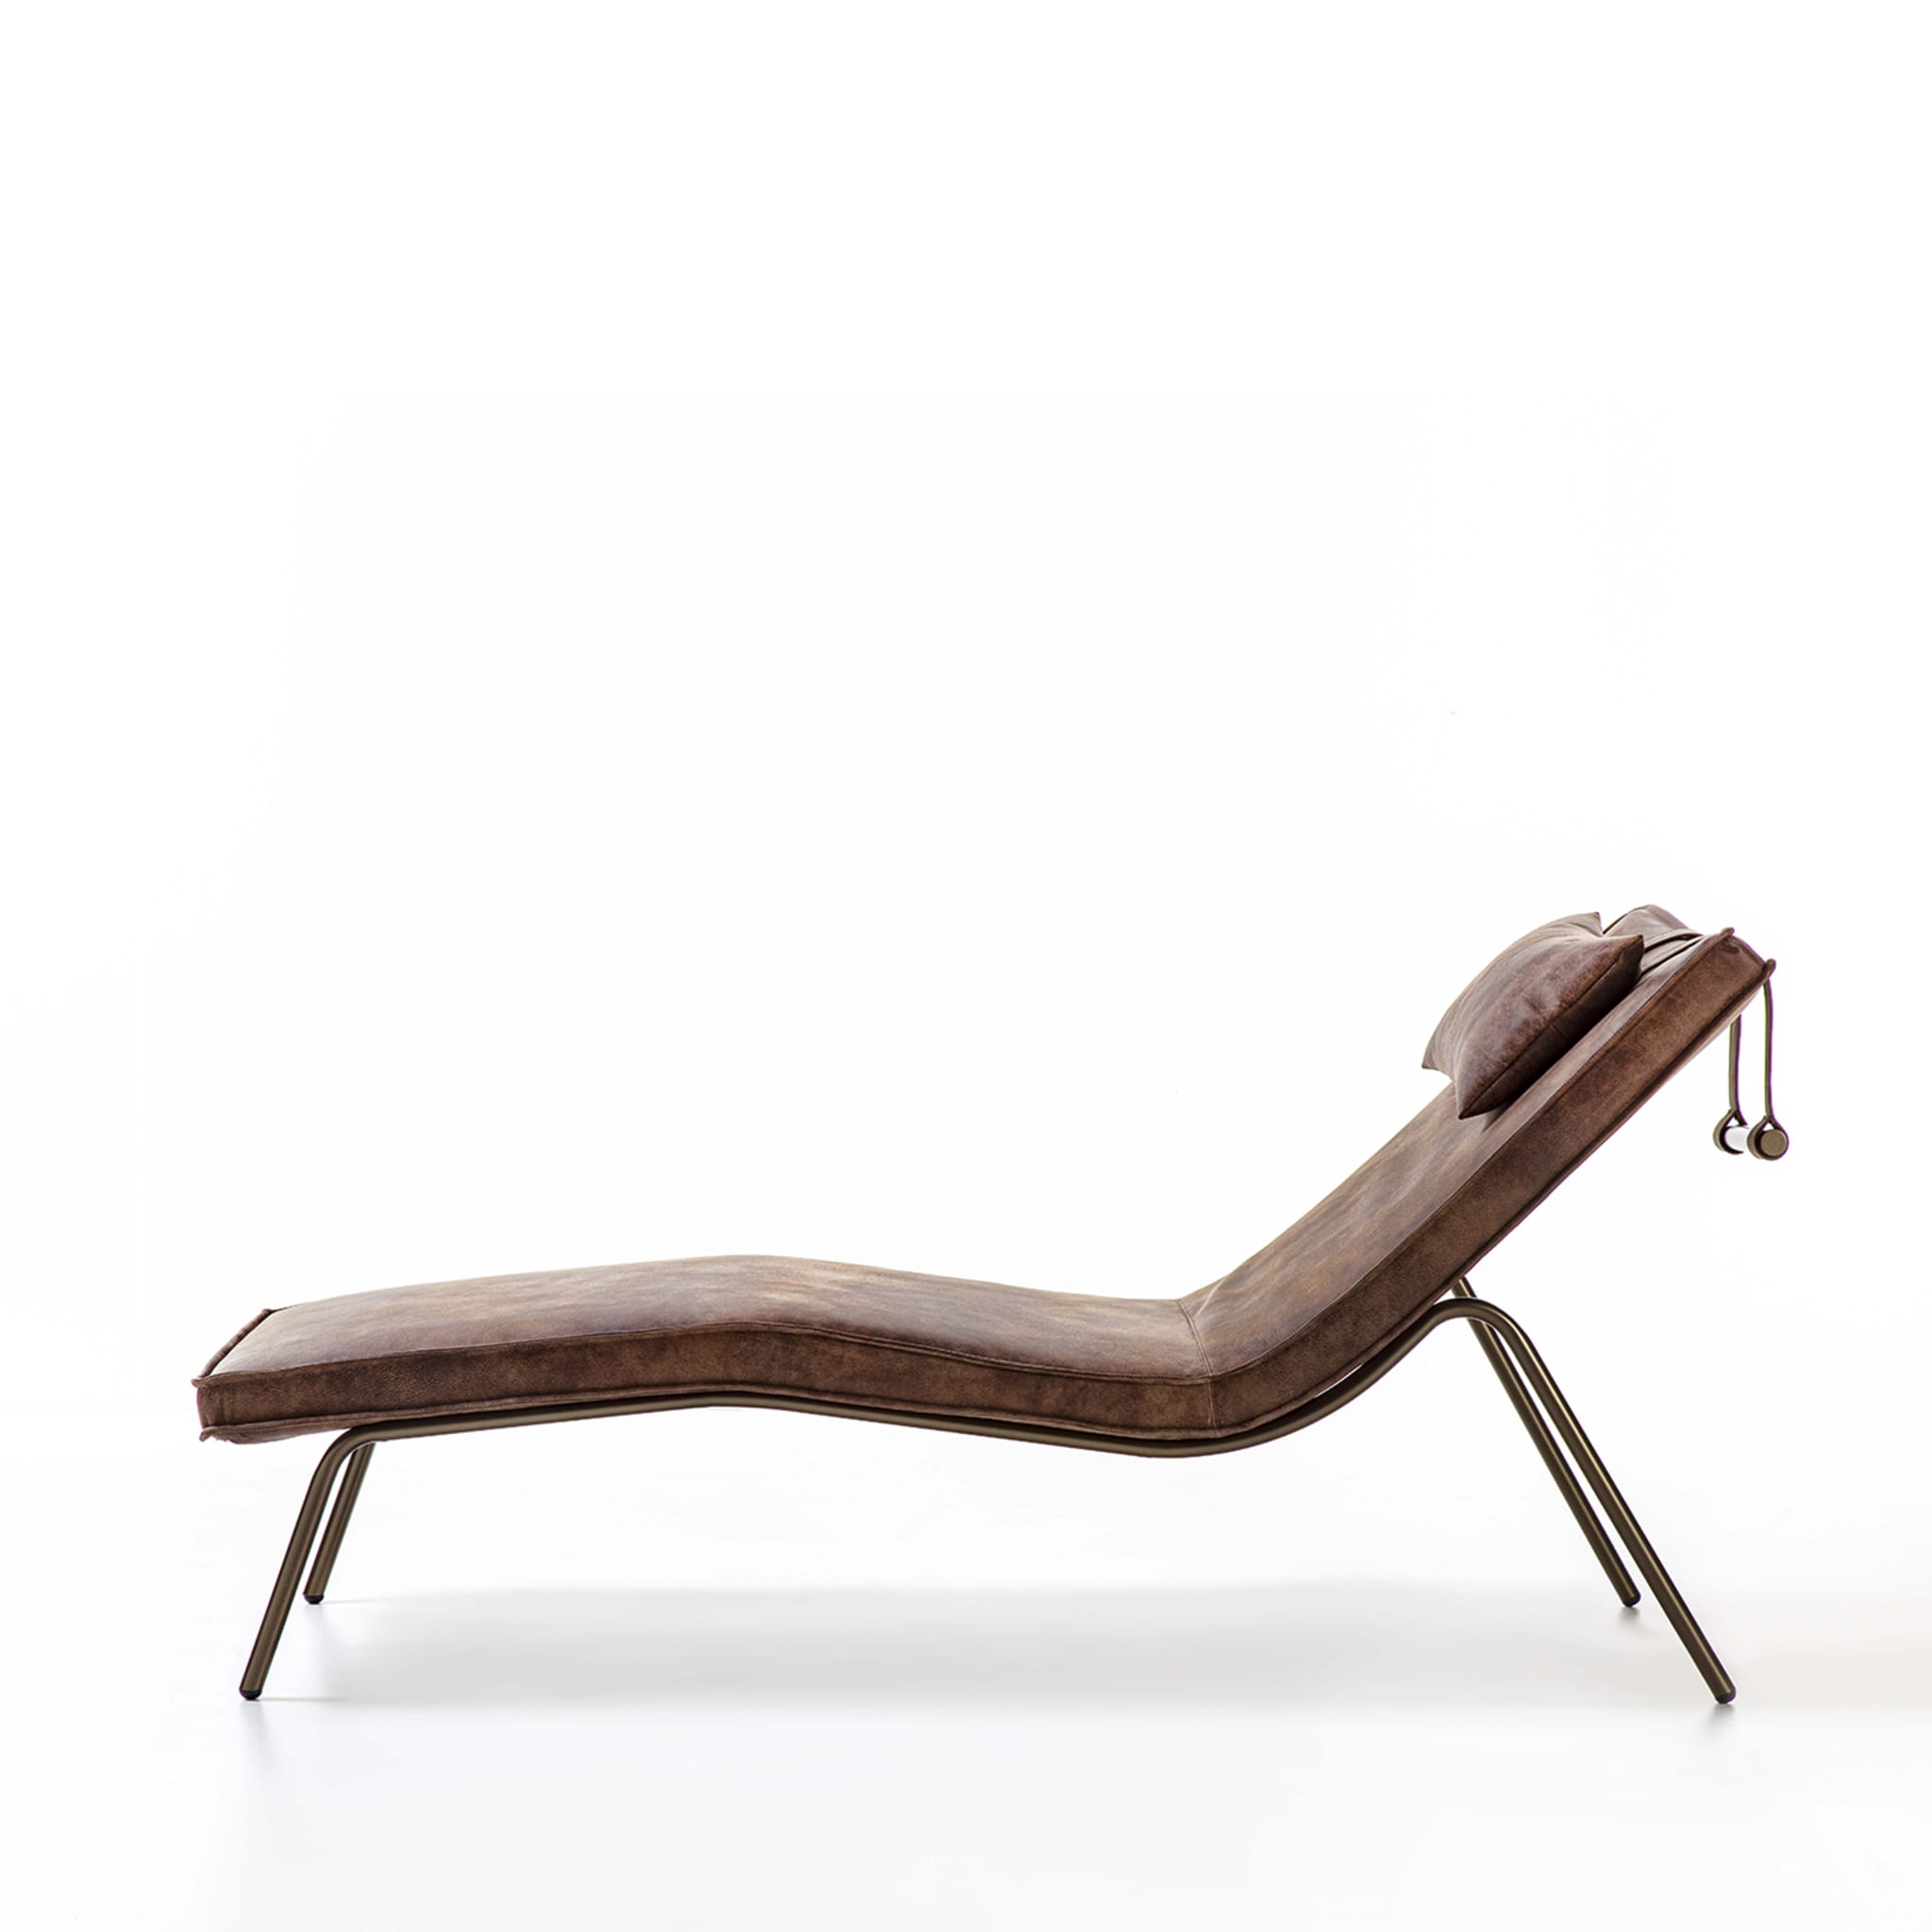 Vintage Brown Leather Chaise Longue - Alternative view 5